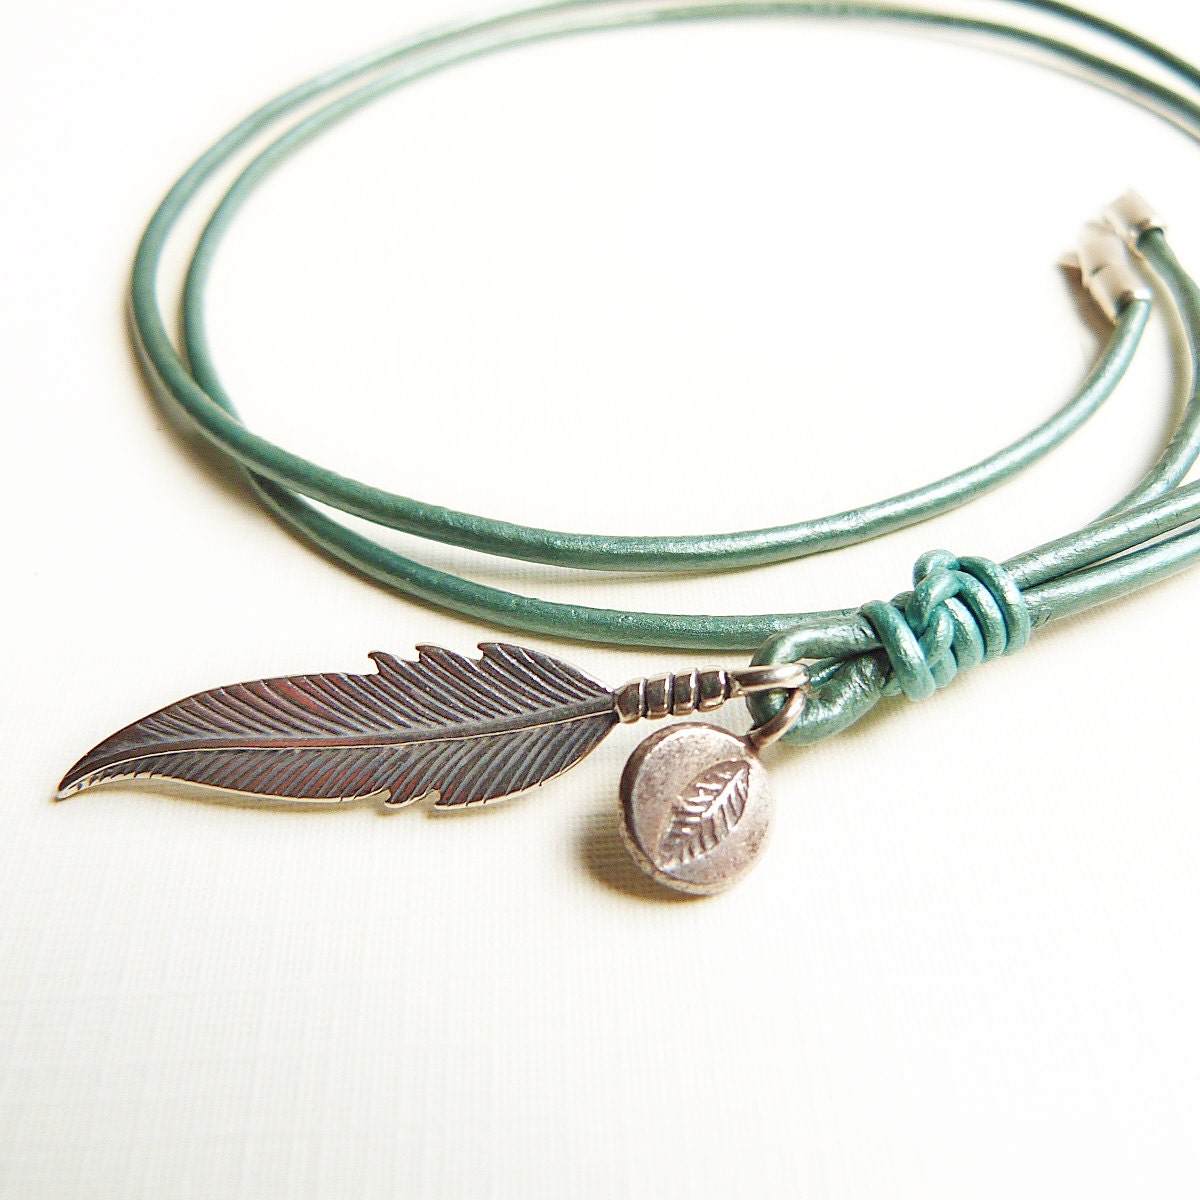 Feather and Leaf Leather Necklace for Women - Two Sterling Silver Pendants on Teal Leather - SivaniAccessories